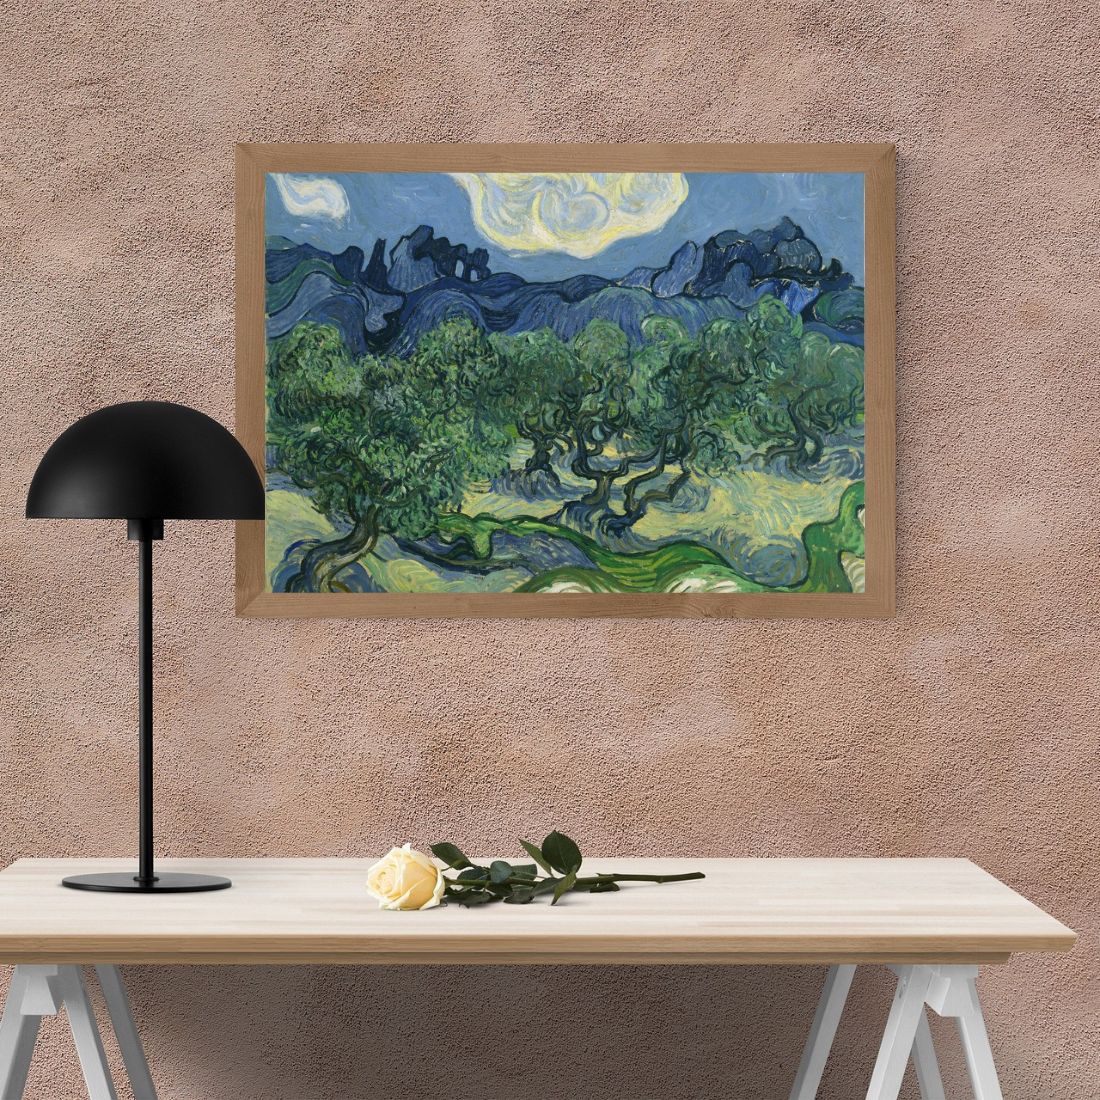 Van Gogh's Olive Trees Wall Art cover image.